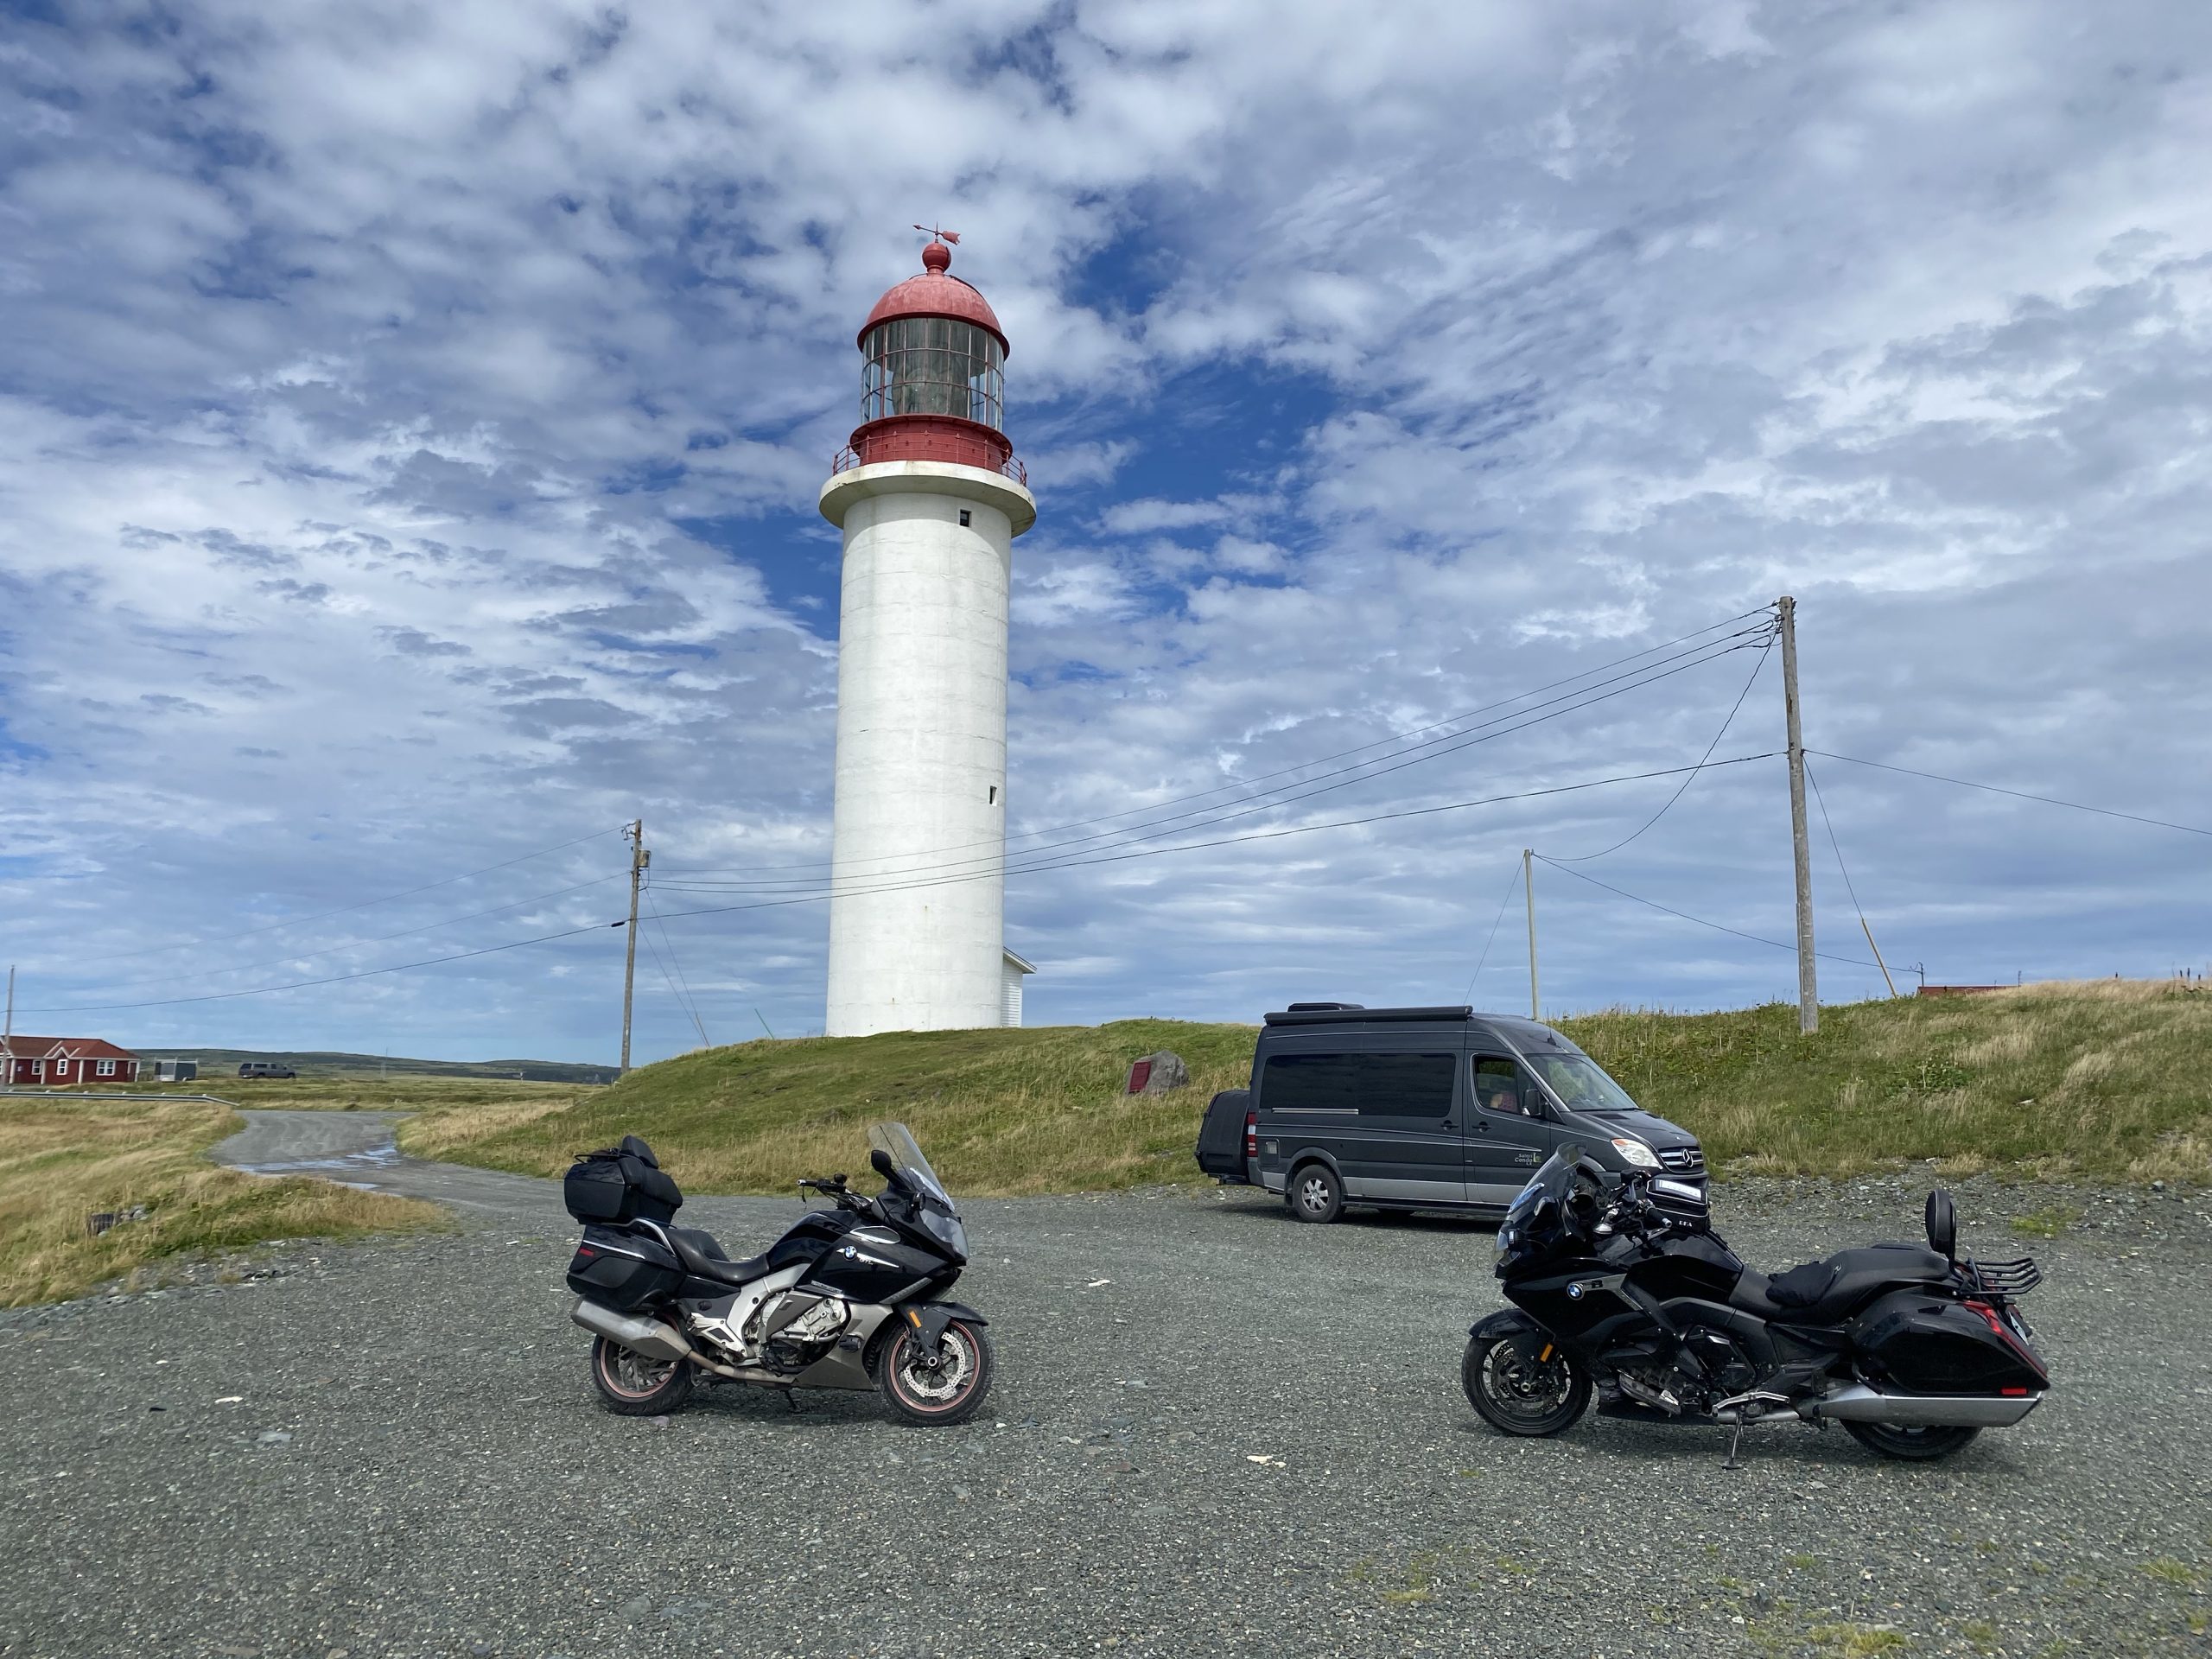 The bikes at the base of the Cape Race lighthouse in Newfoundland.